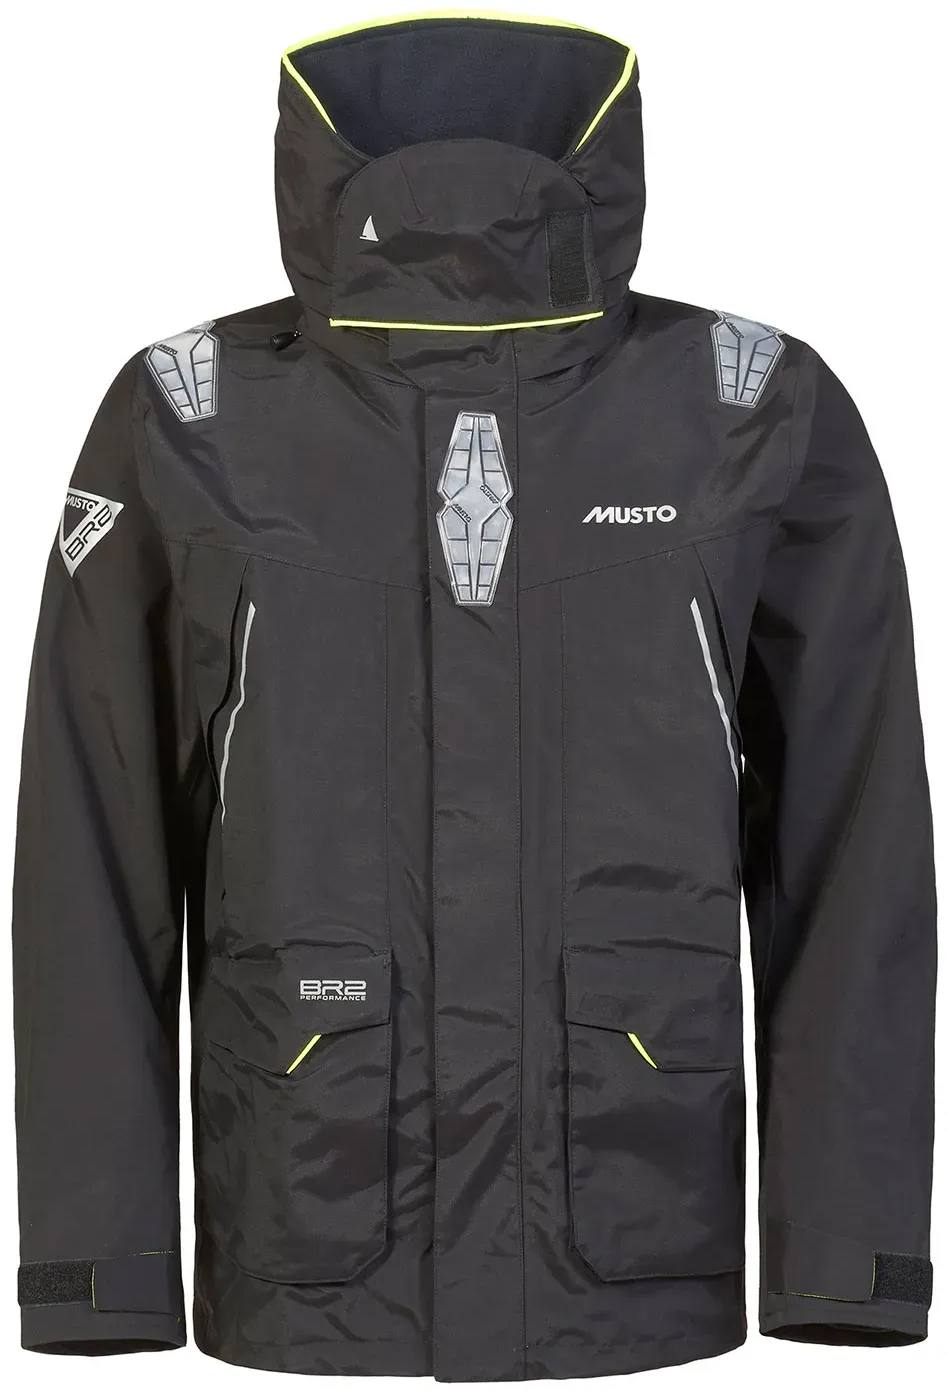 Musto Arena BR2 Jacket SS18 FREE UK SHIPPING 